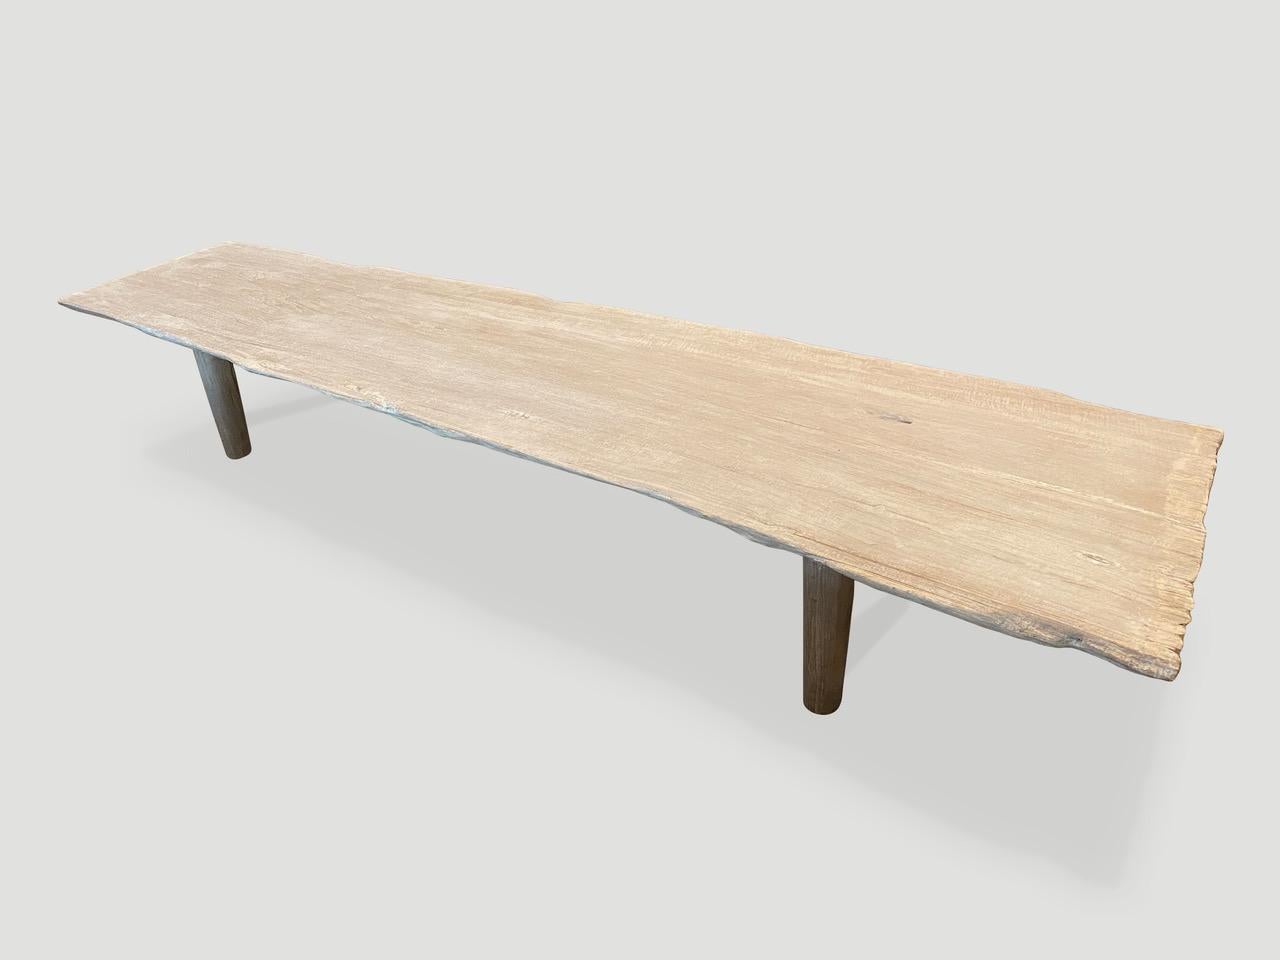 Impressive single slab, live edge bleached teak coffee table or bench with natural erosion on one end. We have added a light white wash finish revealing the beautiful grain on this reclaimed two inch teak slab. Finally we added minimalist legs.